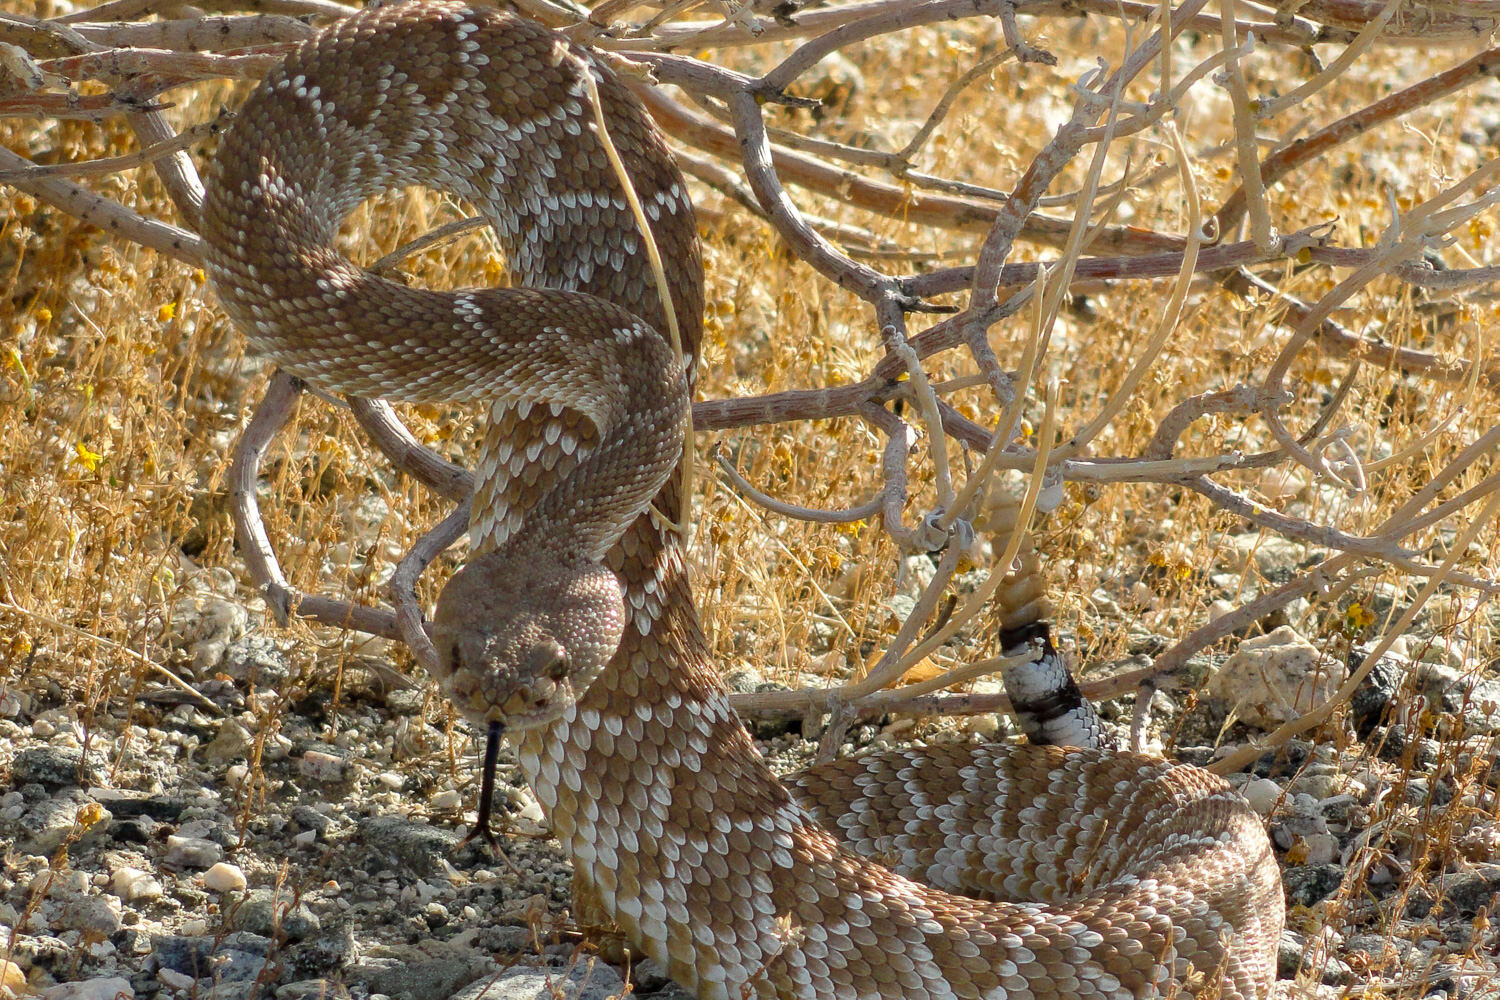 rattlesnakes are scary, but they do try to give you fair warning when you startle them